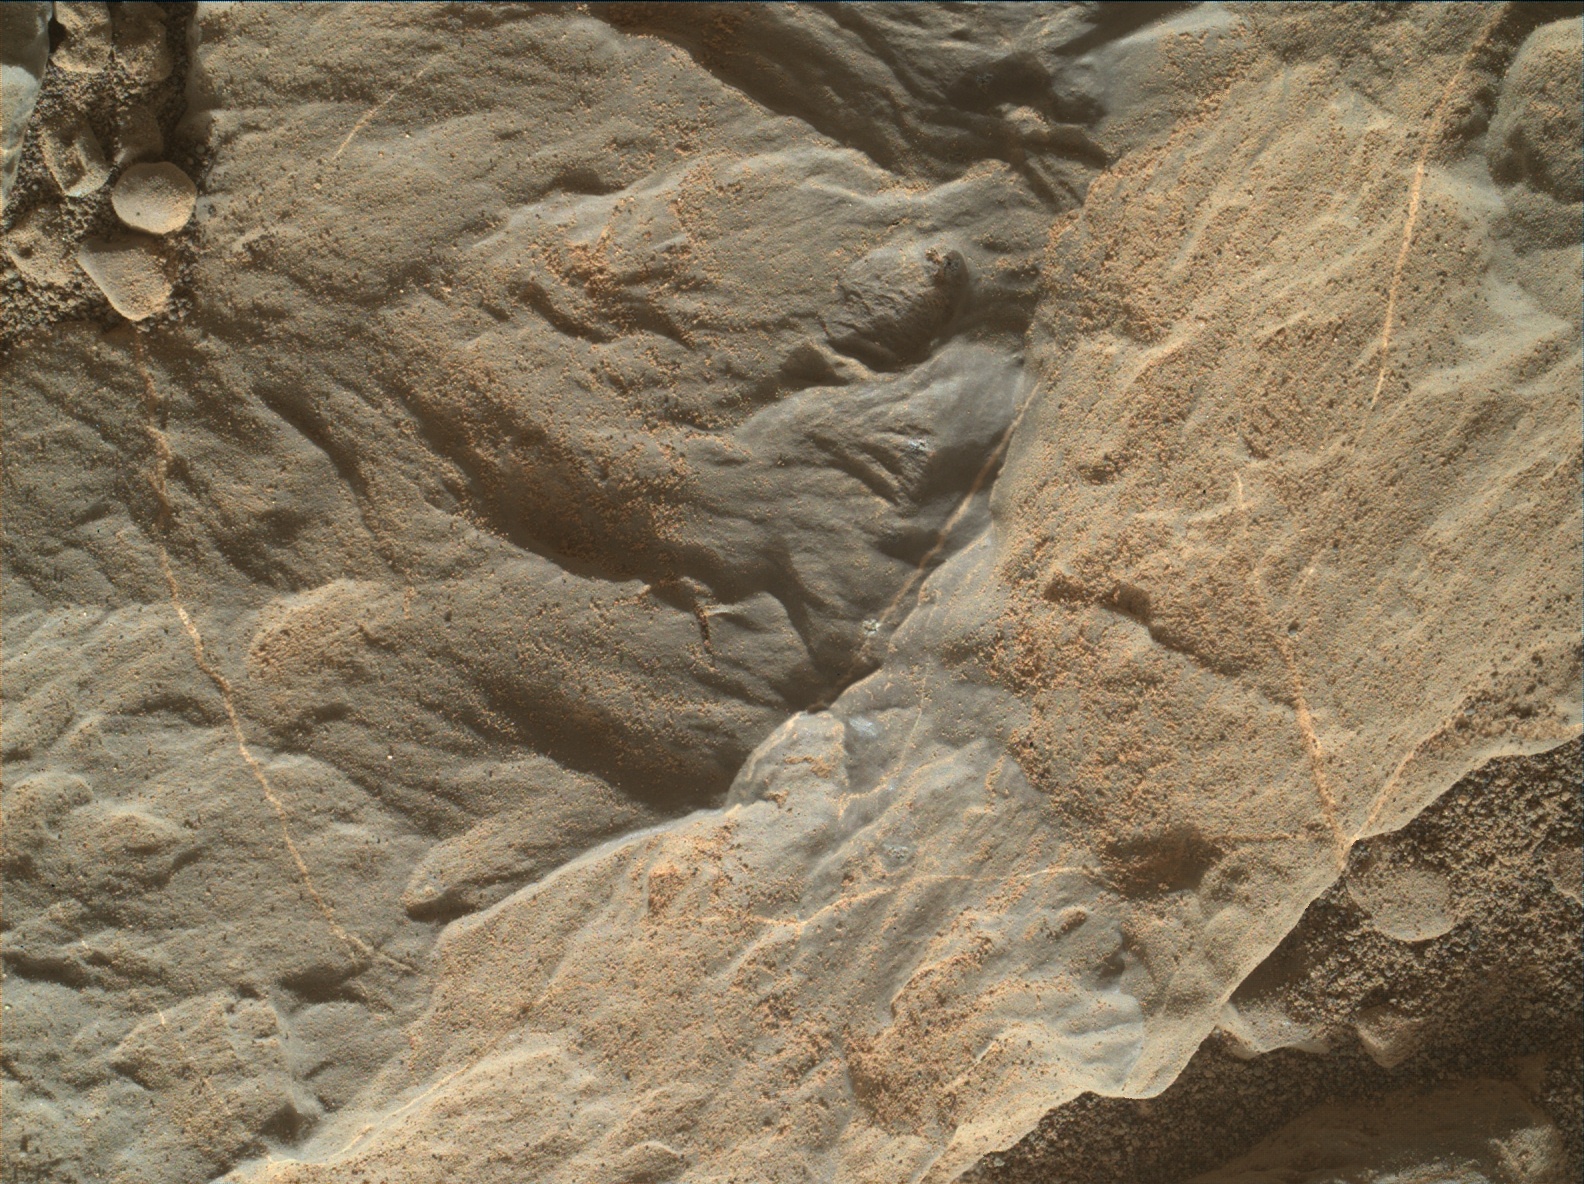 Nasa's Mars rover Curiosity acquired this image using its Mars Hand Lens Imager (MAHLI) on Sol 1881